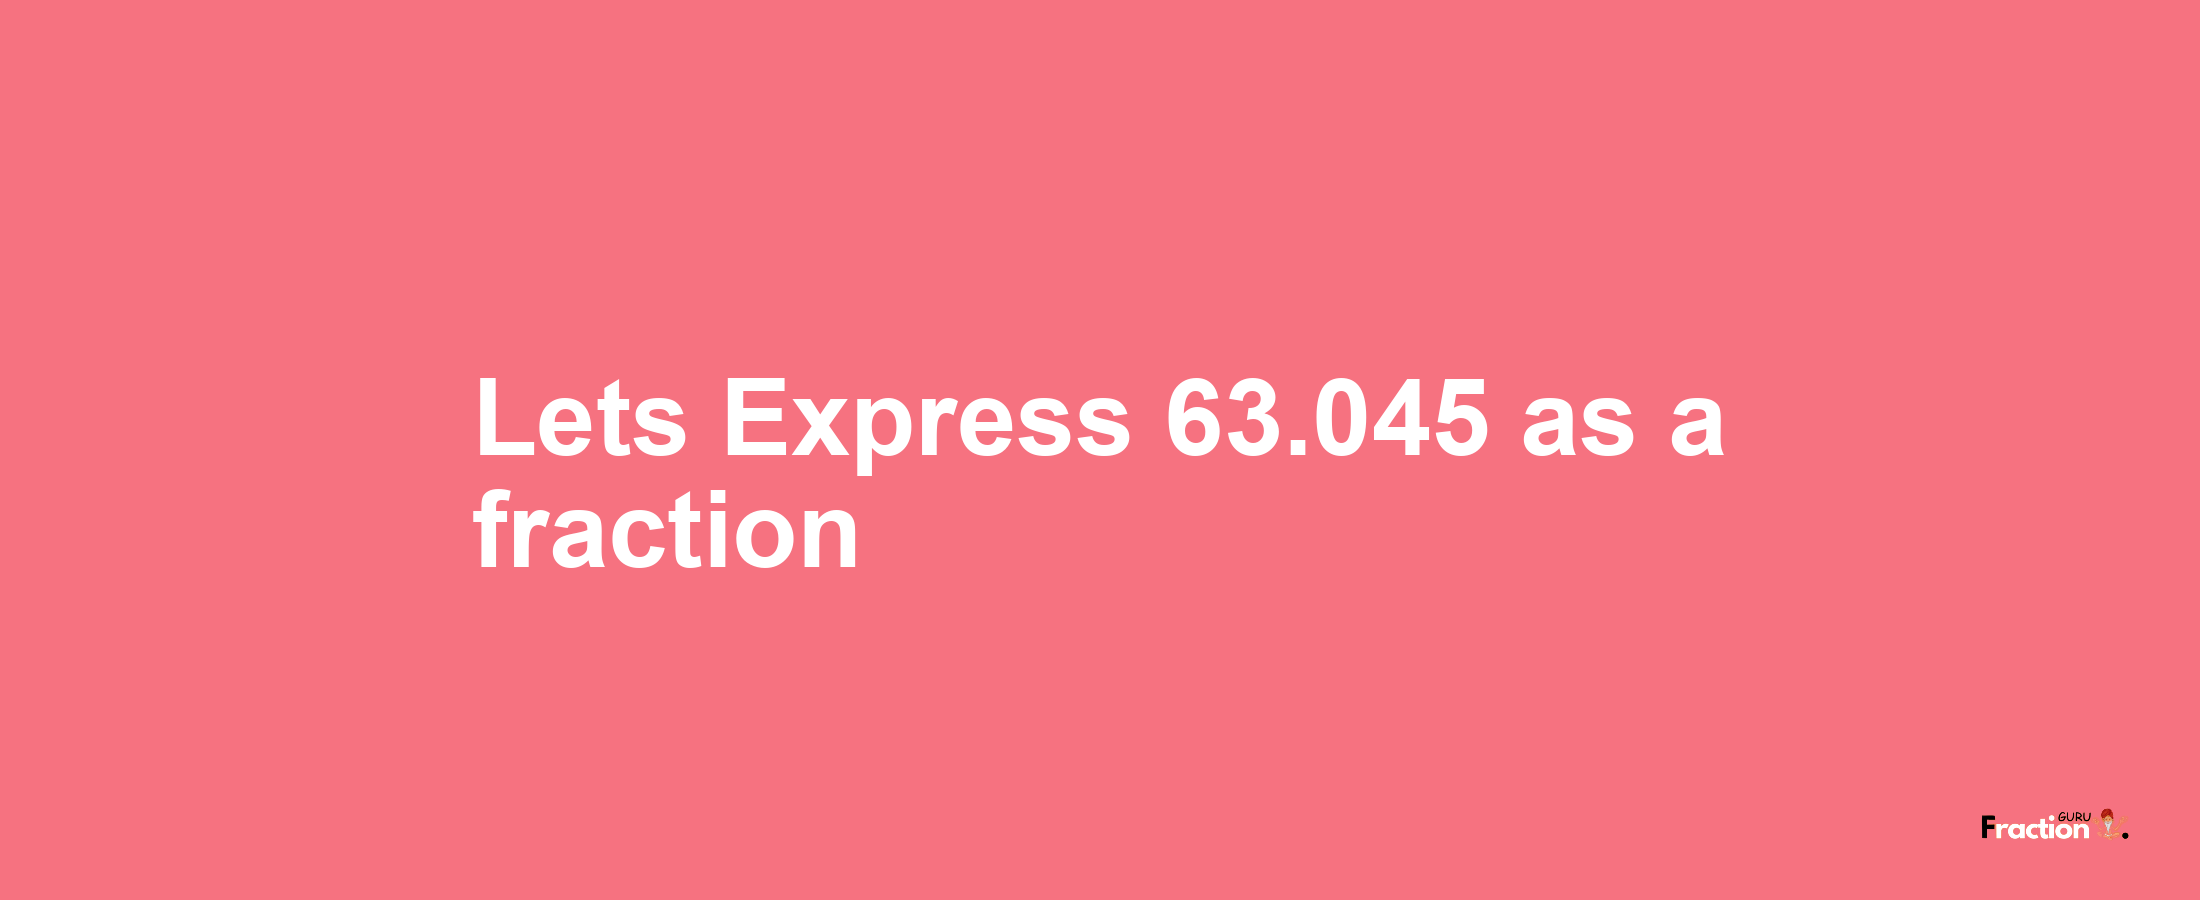 Lets Express 63.045 as afraction